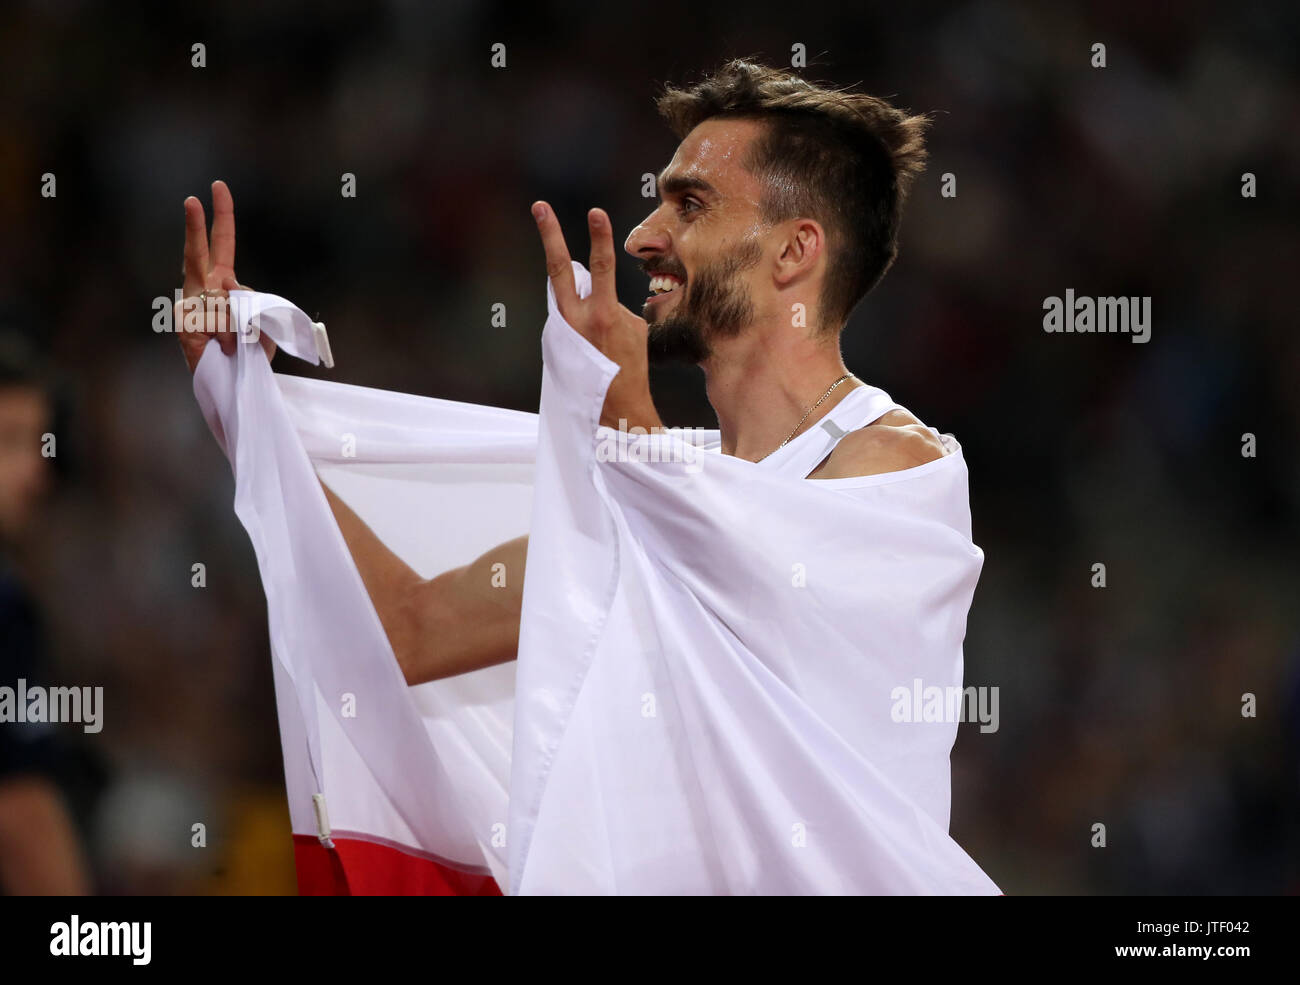 Poland's Adam Kszczot celebrates silver in the Men's 800m Final during day five of the 2017 IAAF World Championships at the London Stadium. Stock Photo